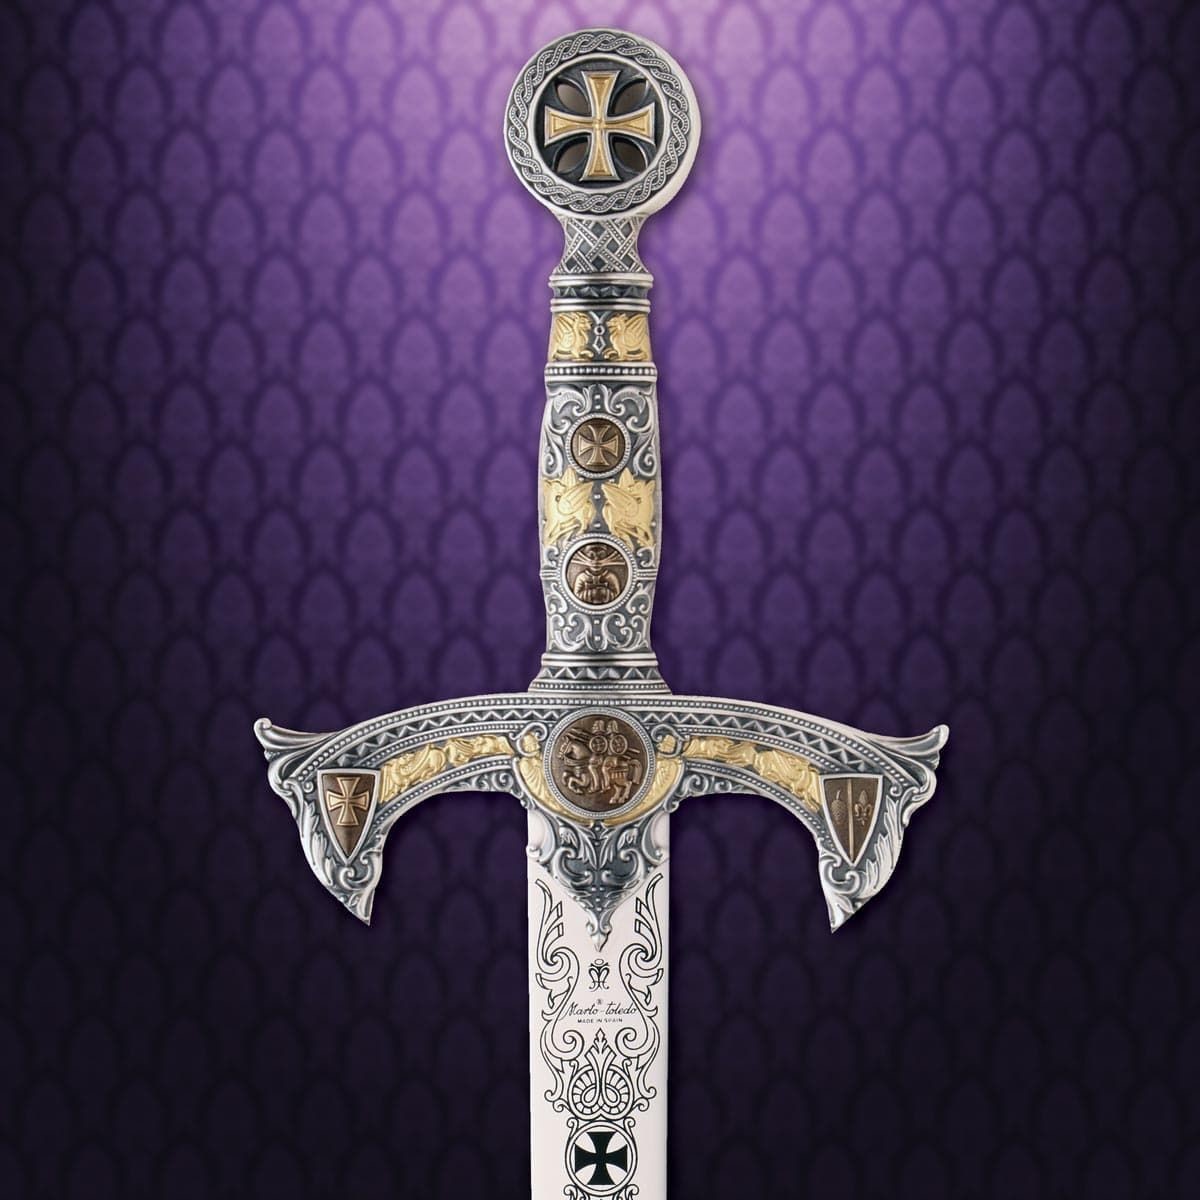 Details about   Decorative Medieval Holy Knight Templar Sword with Scabbard 